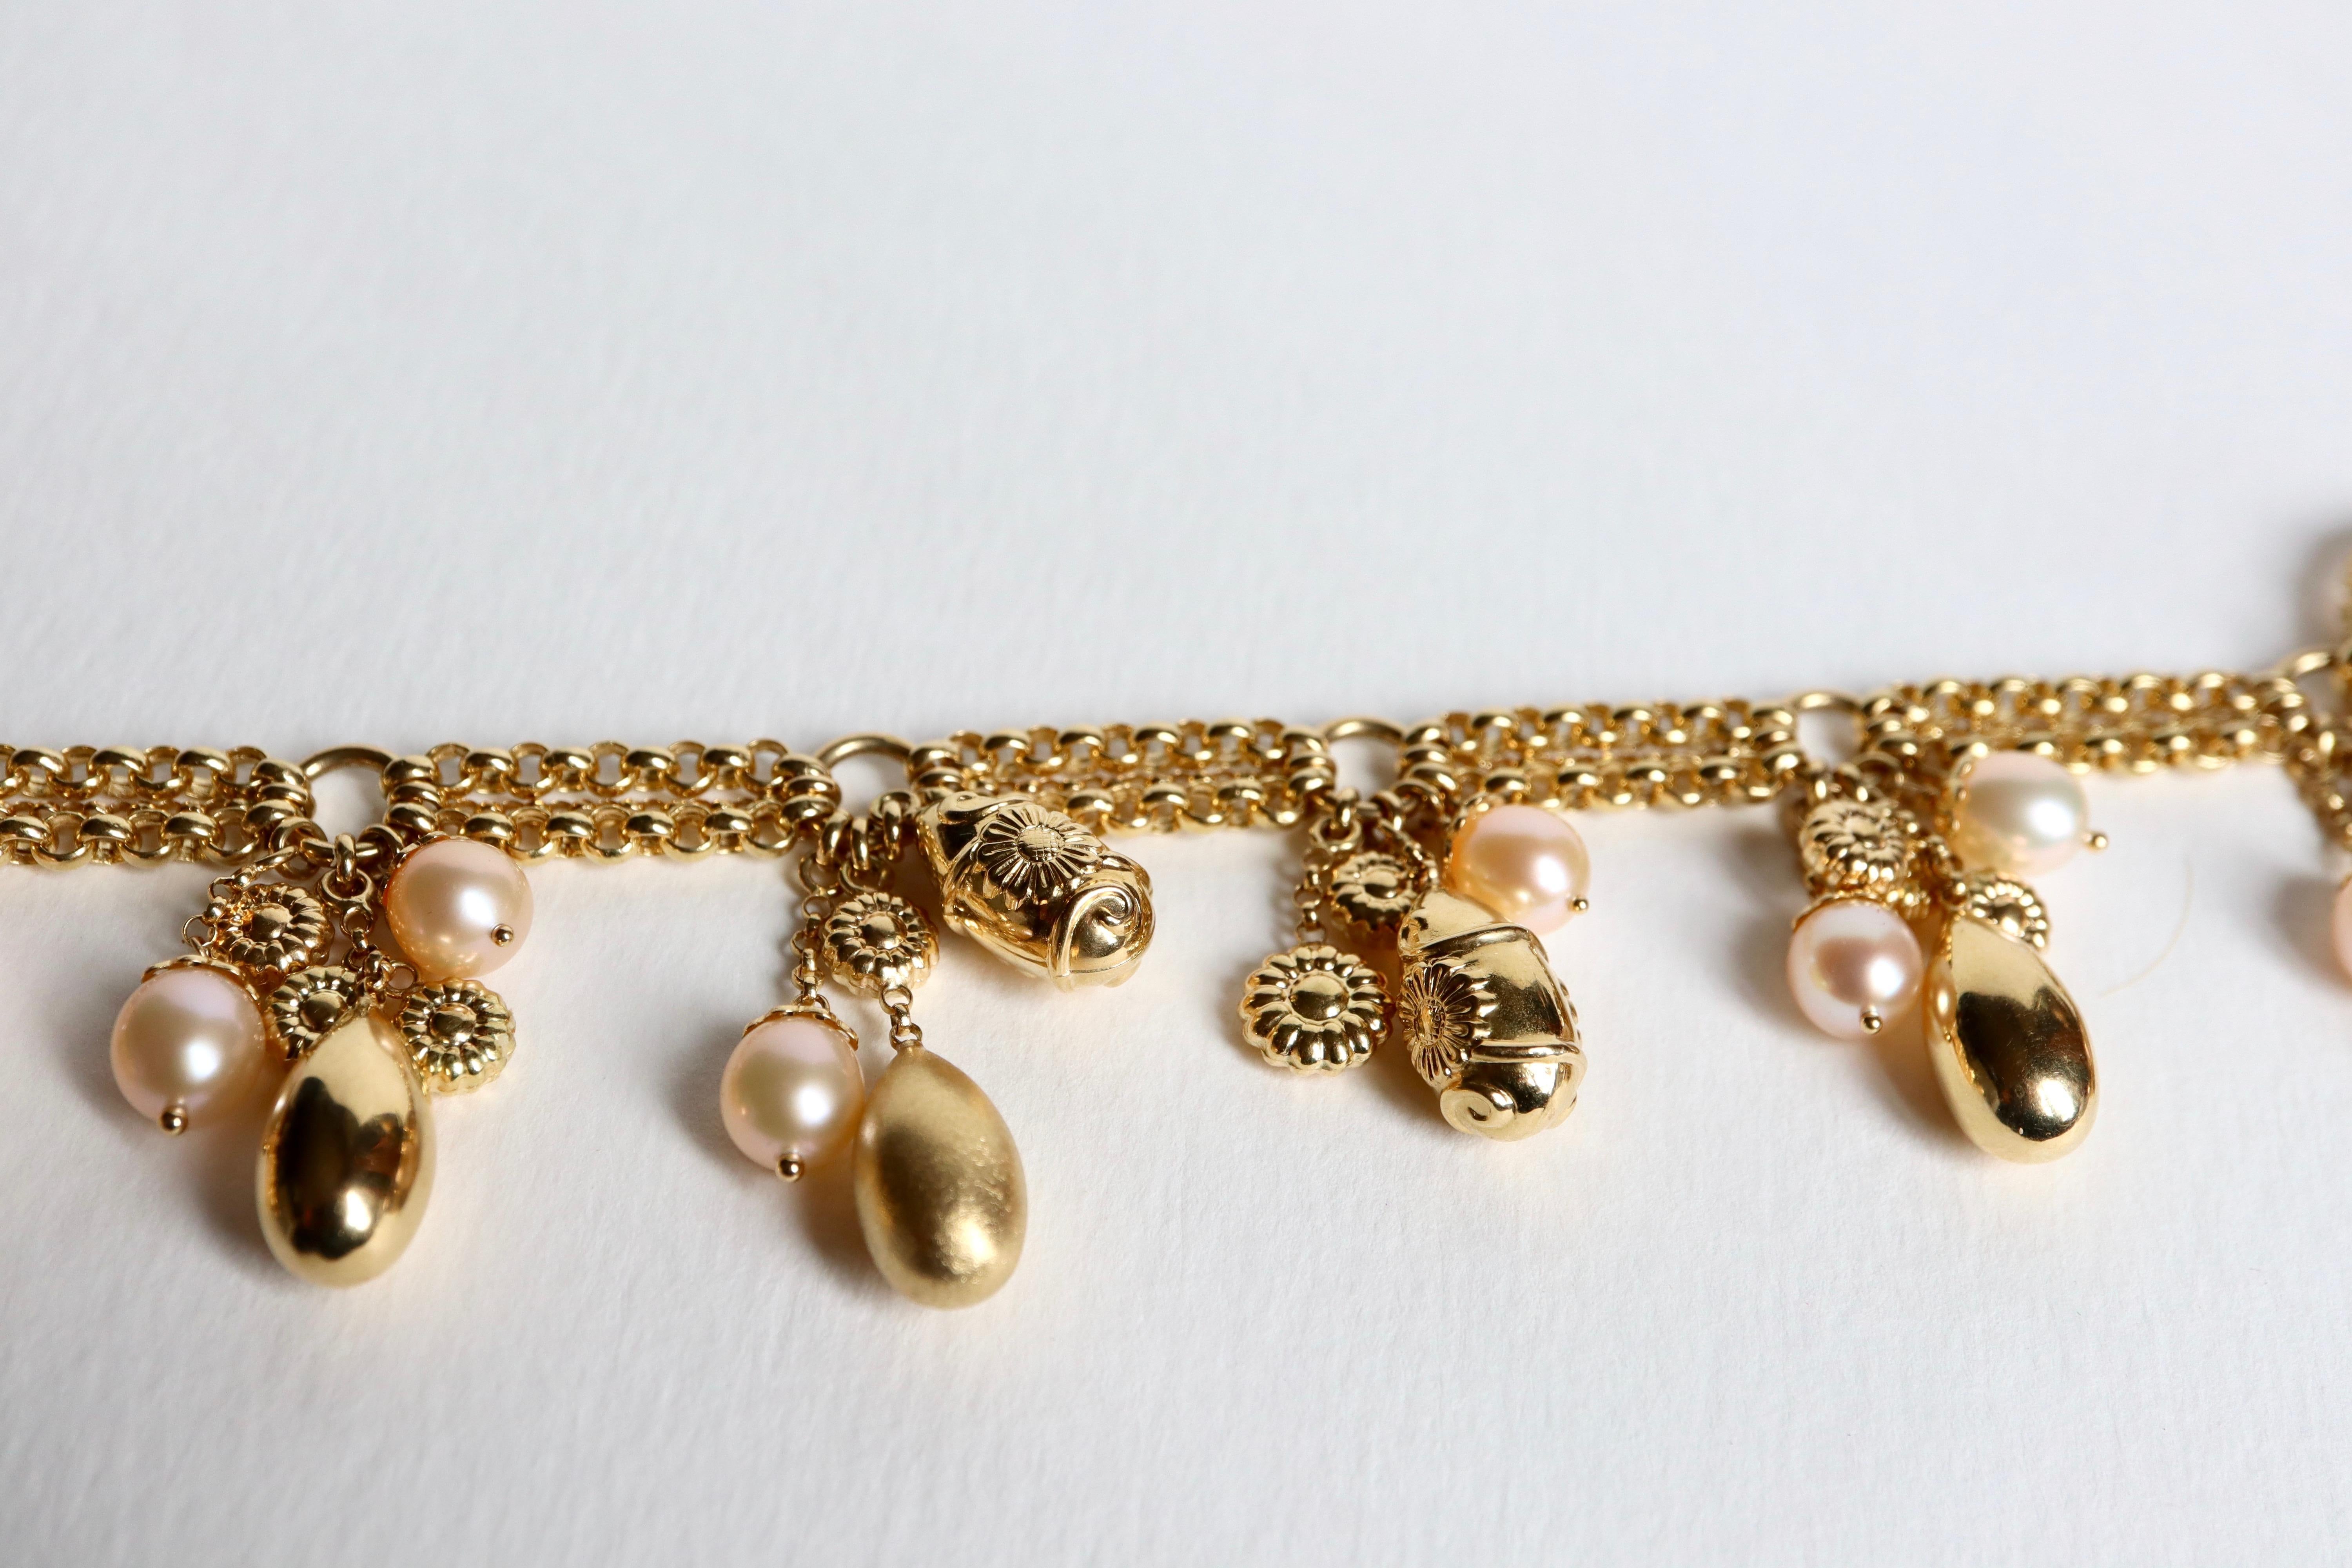 Women's or Men's Charm Bracelet in 18k Yellow Gold and Pearls For Sale